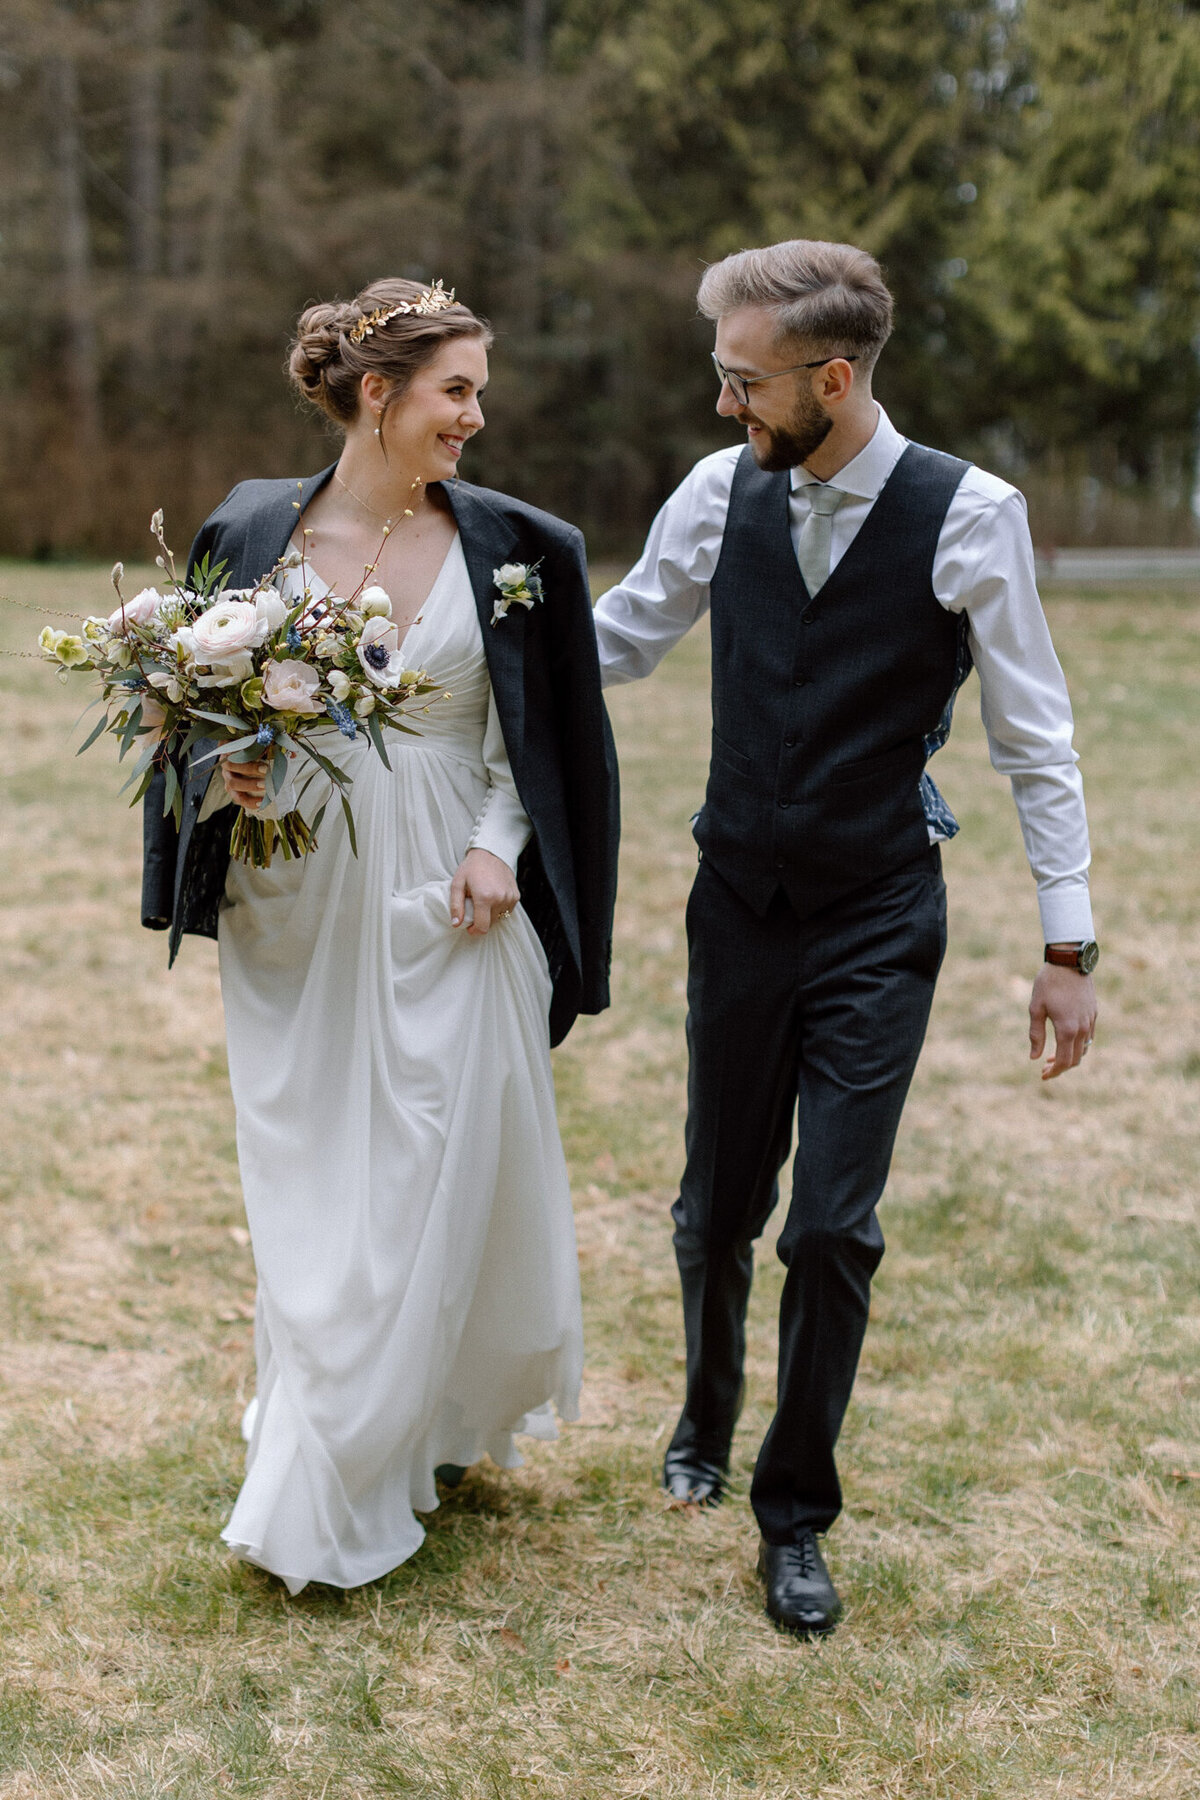 Gorgeous bride and groom portrait by Bronte Taylor Photography, a Vancouver-based photographer with a playful, genuine and intimate approach.